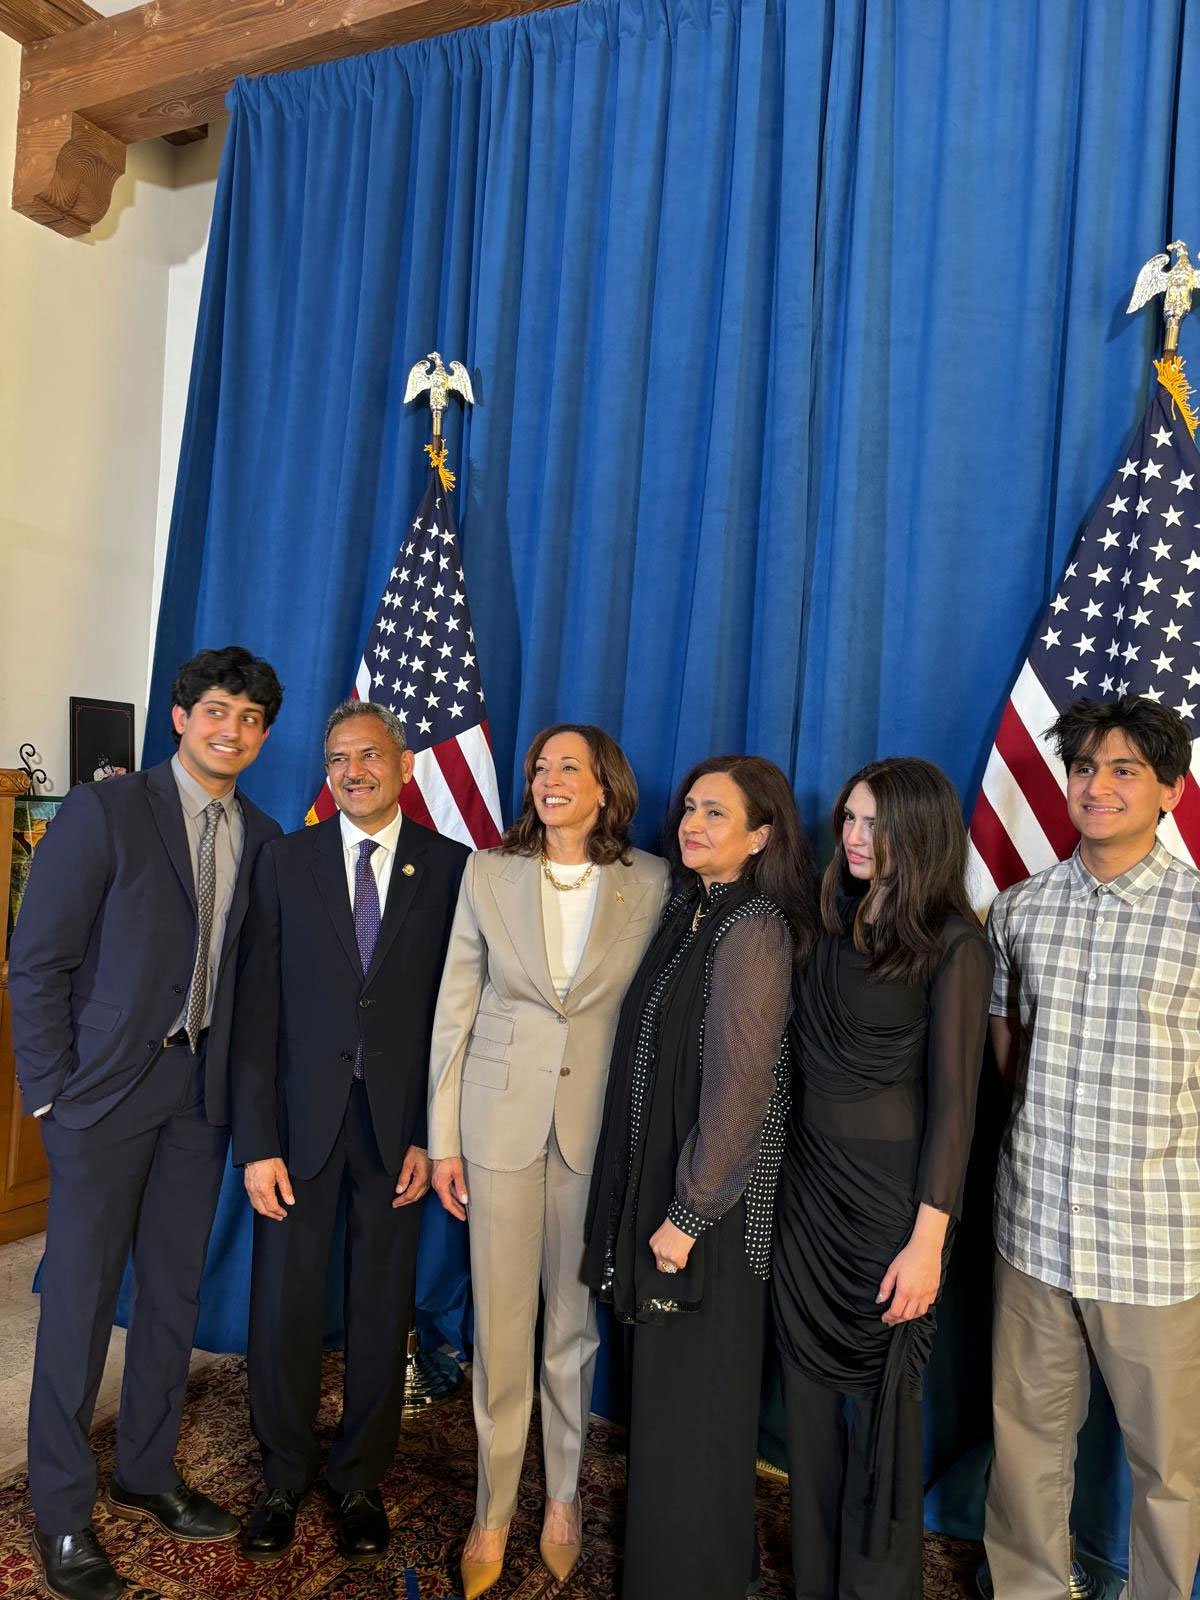 VP Kamala Harris poses for a photograph with the host Dr Asif Mehmood and his family in the US. — Photo provided by author